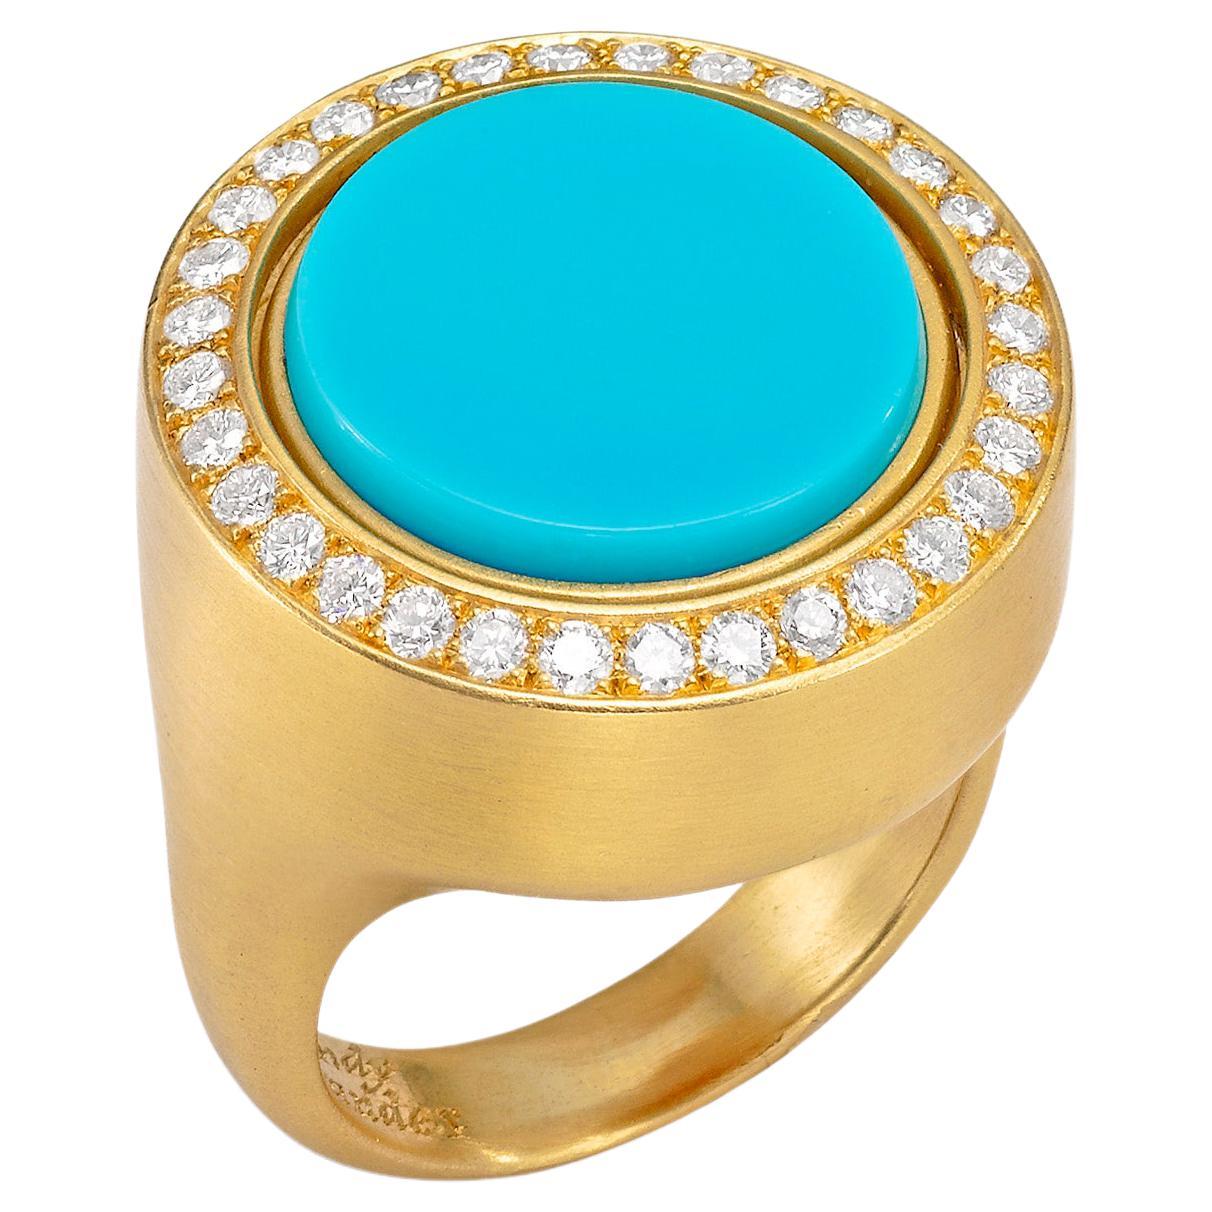 Wendy Brandes 2-in-1 Turquoise and Carnelian Flip Ring, 18K Gold, Diamonds